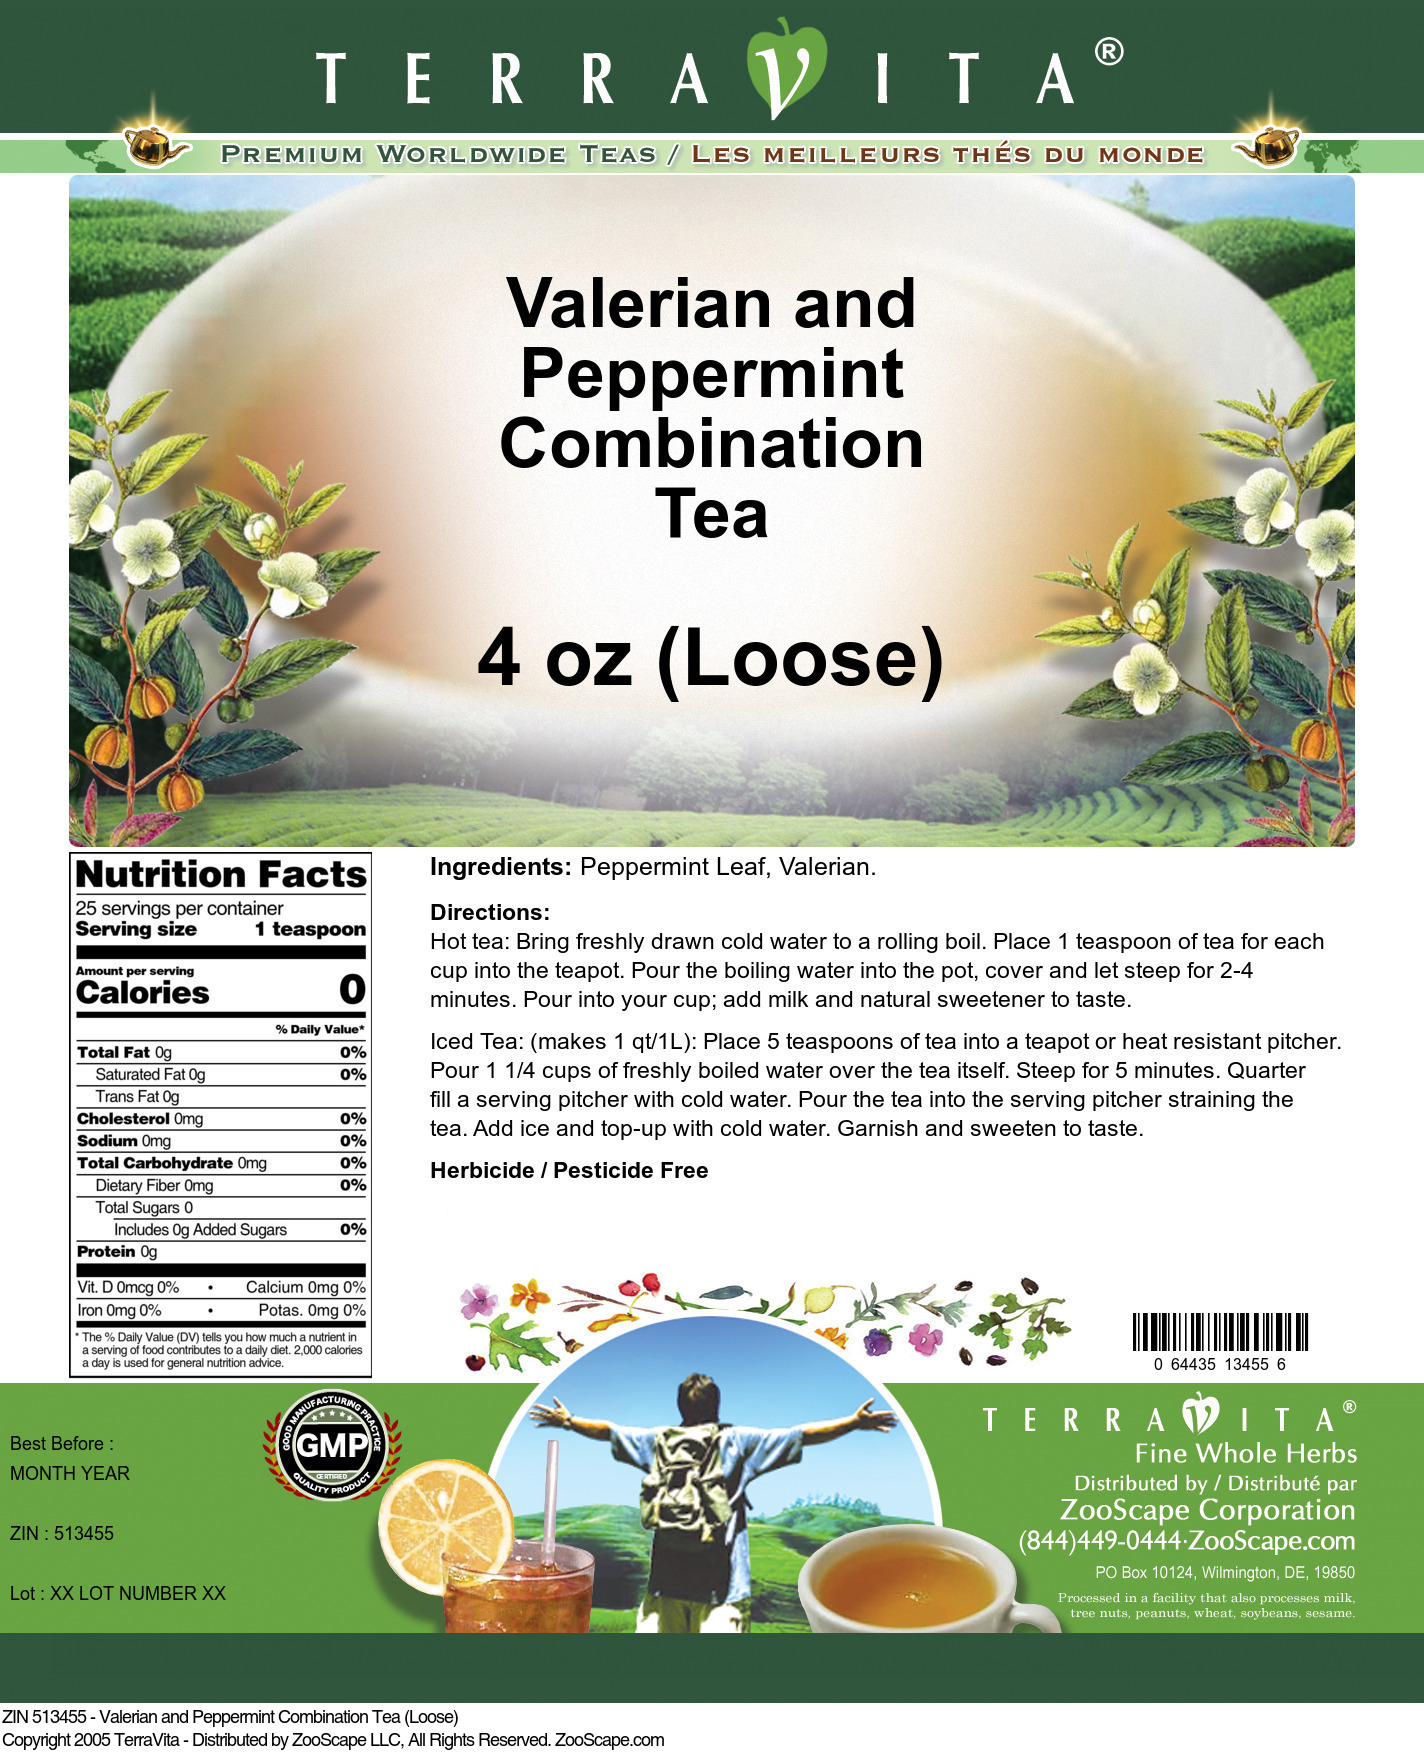 Valerian and Peppermint Combination Tea (Loose) - Label